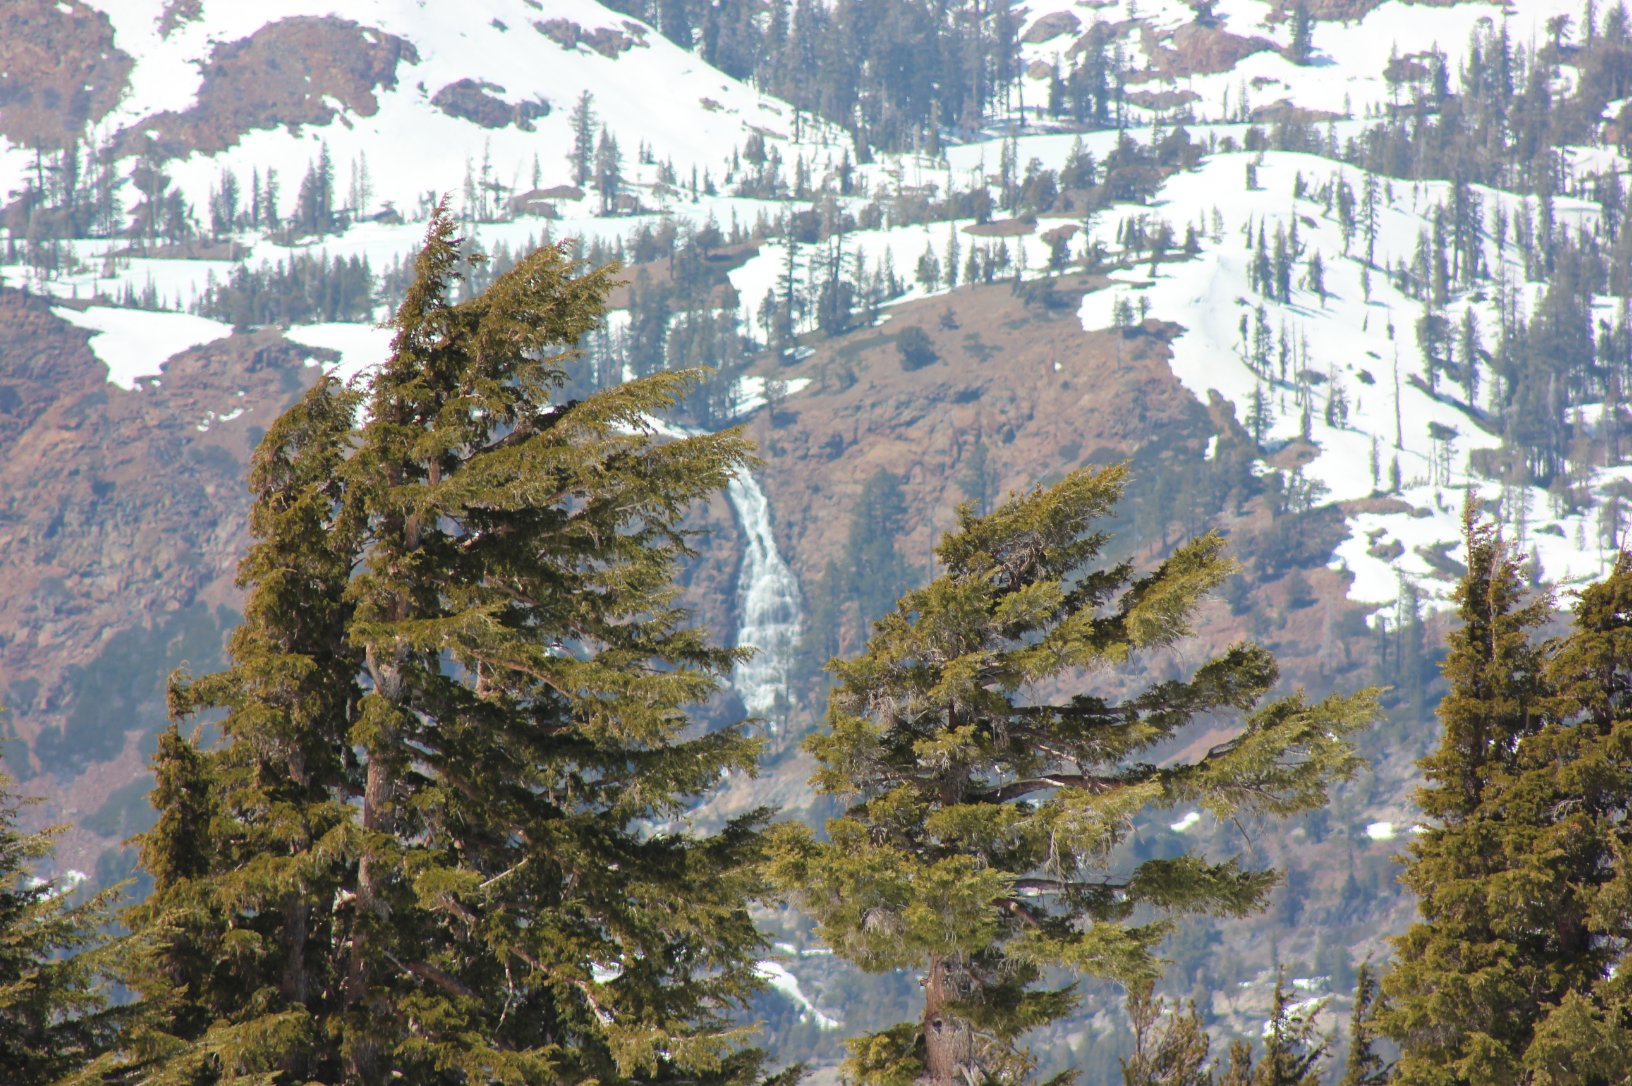 Waterfall coming out of Susie Lake